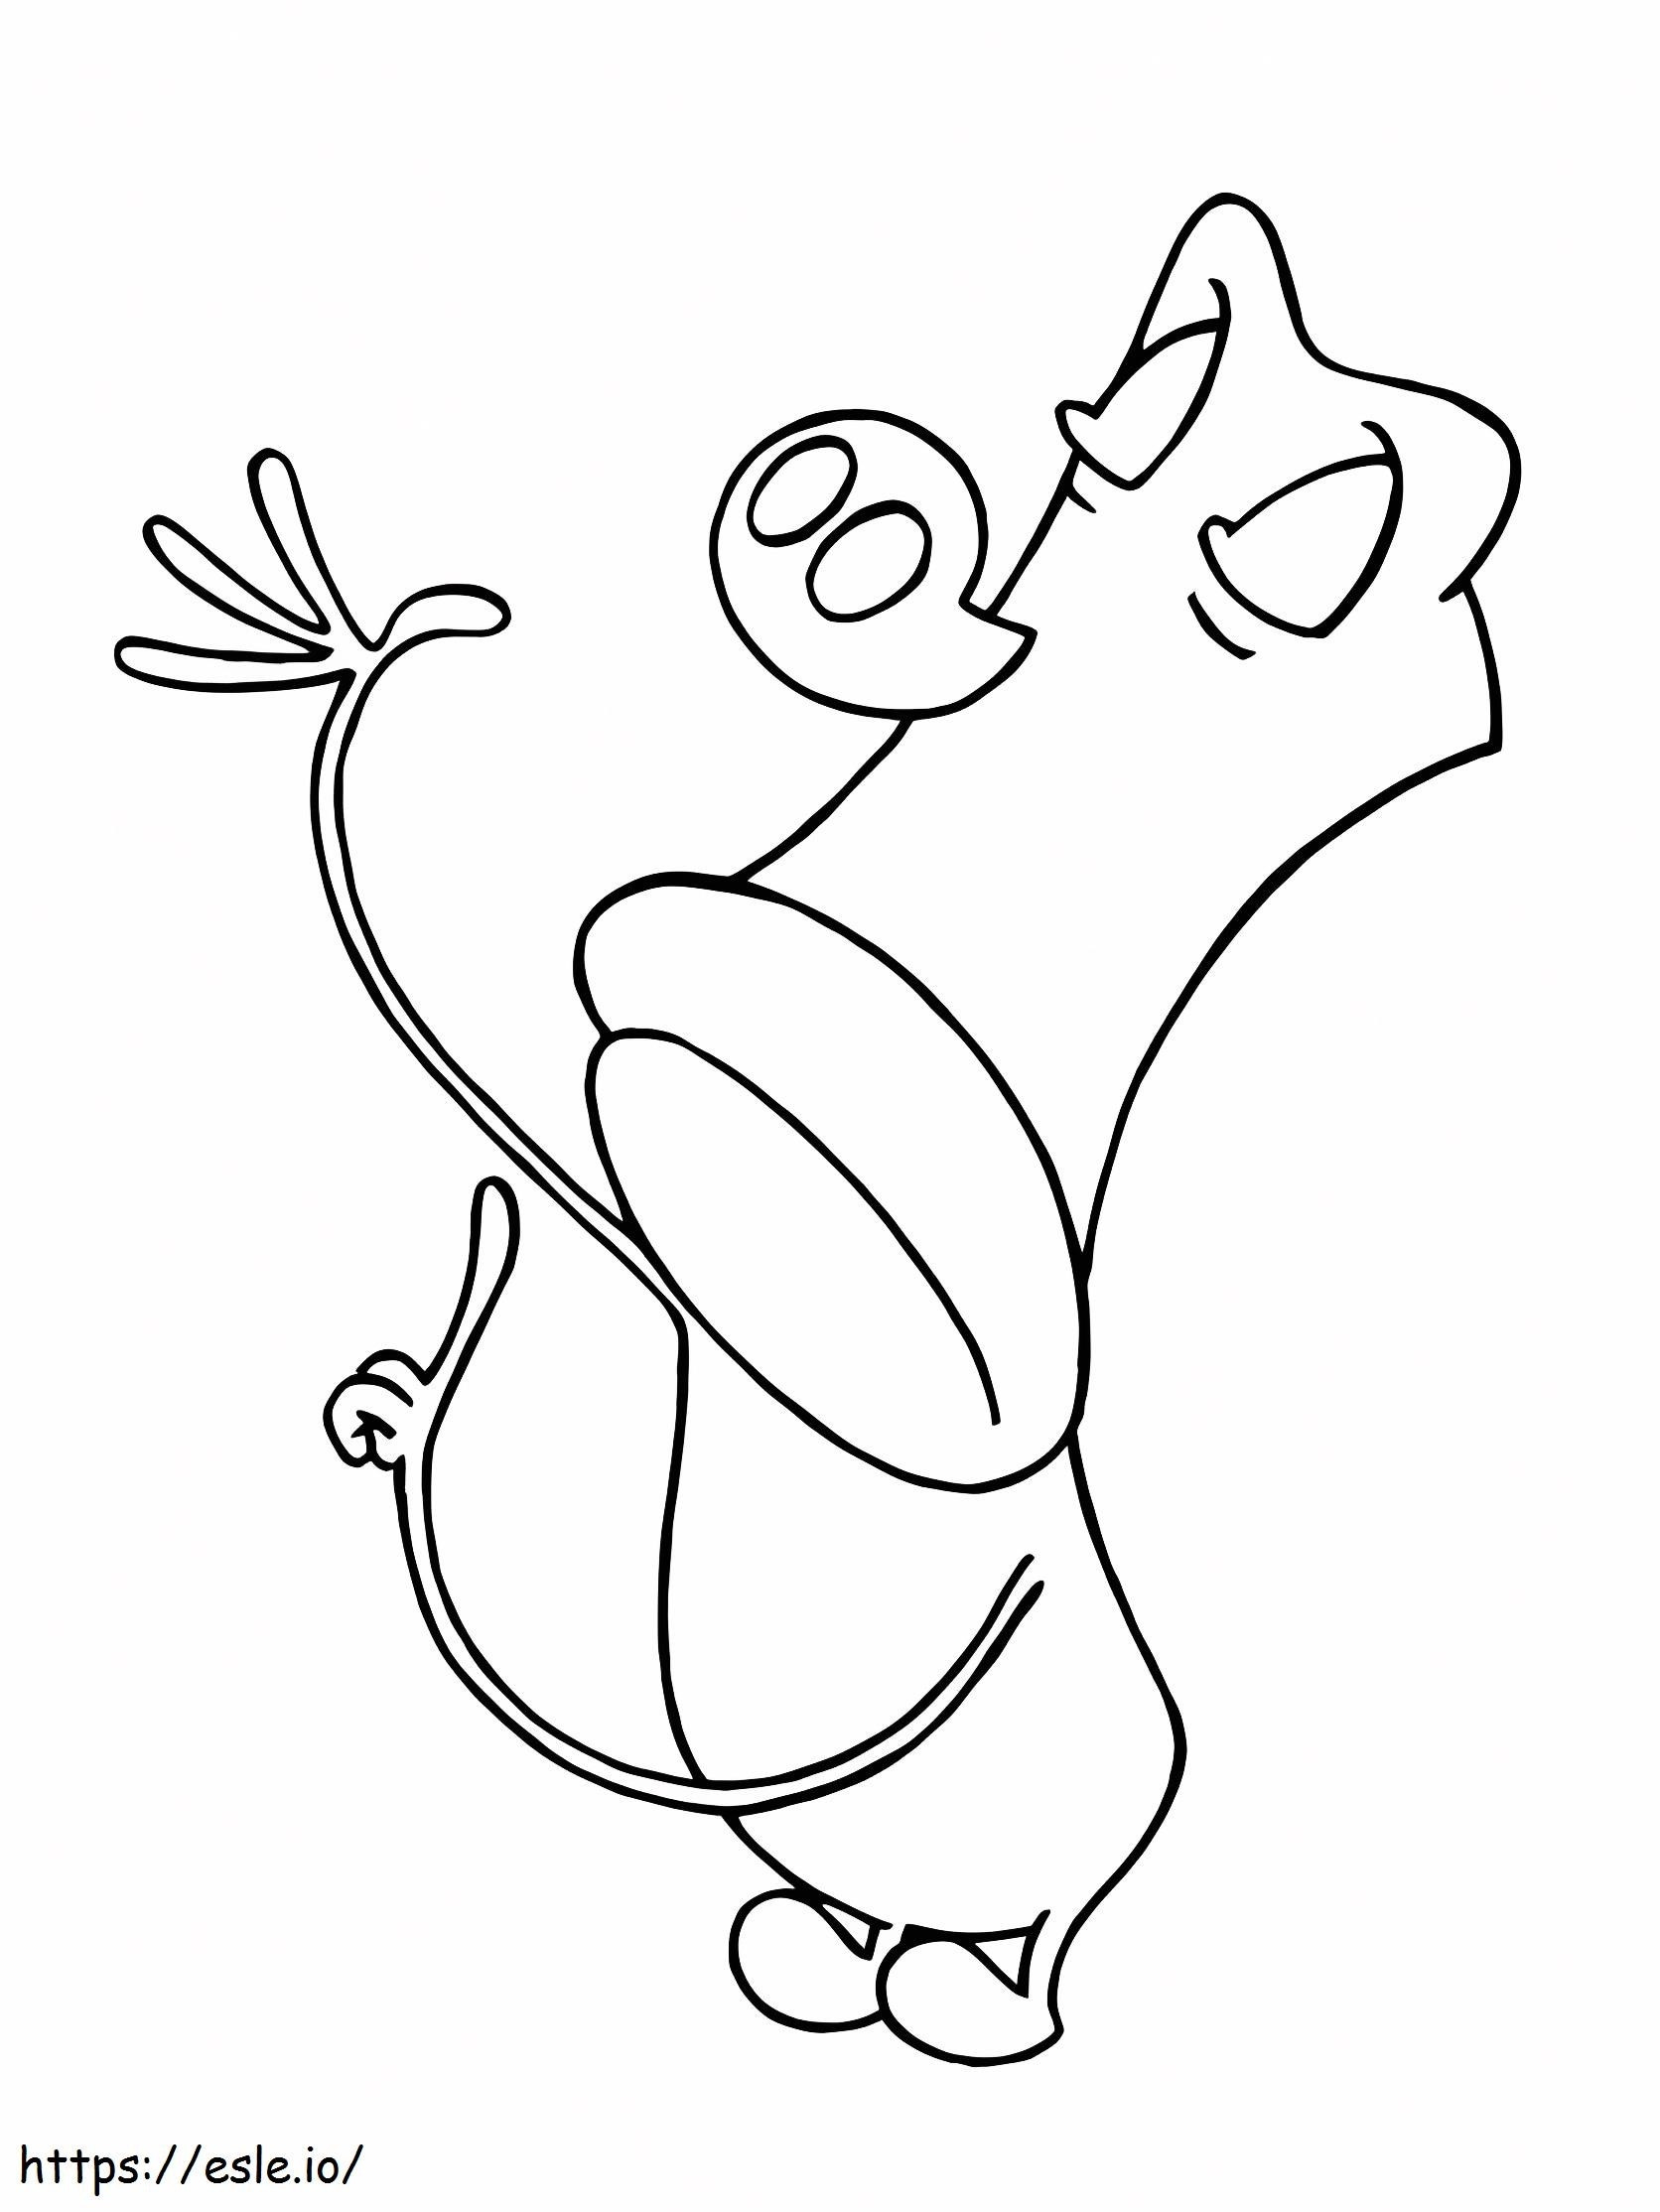 Free Ethno Polino coloring page